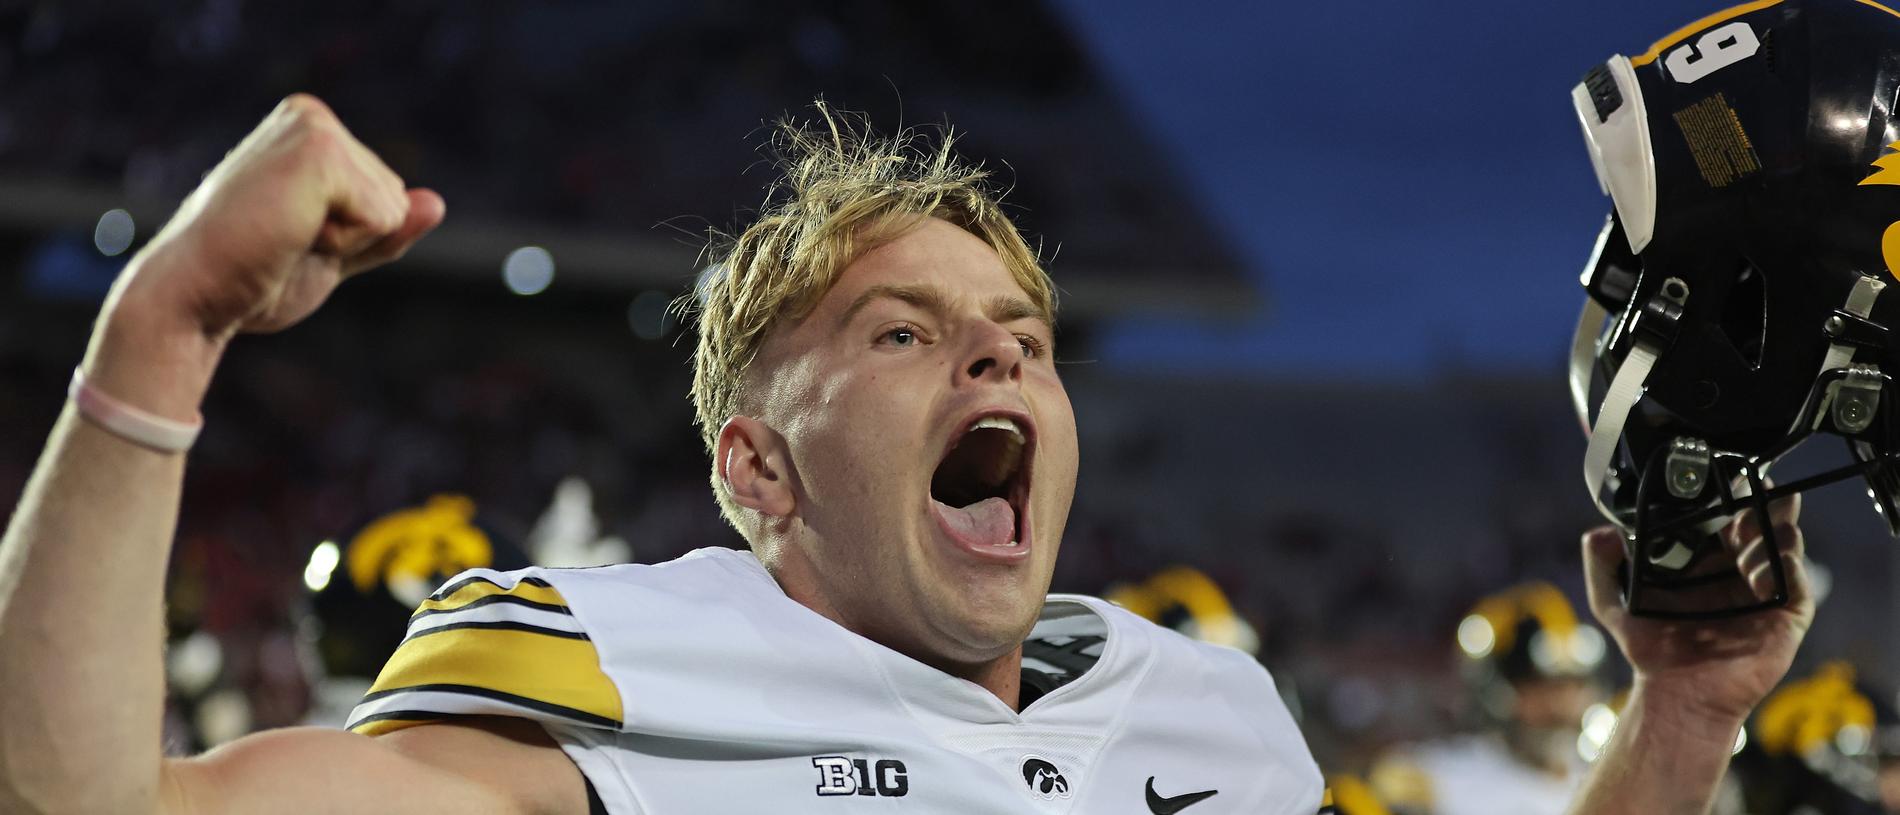 MADISON, WISCONSIN - OCTOBER 14: Tory Taylor #9 of the Iowa Hawkeyes celebrates after the Hawkeyes defeated the Wisconsin Badgers at Camp Randall Stadium on October 14, 2023 in Madison, Wisconsin. (Photo by Stacy Revere/Getty Images)